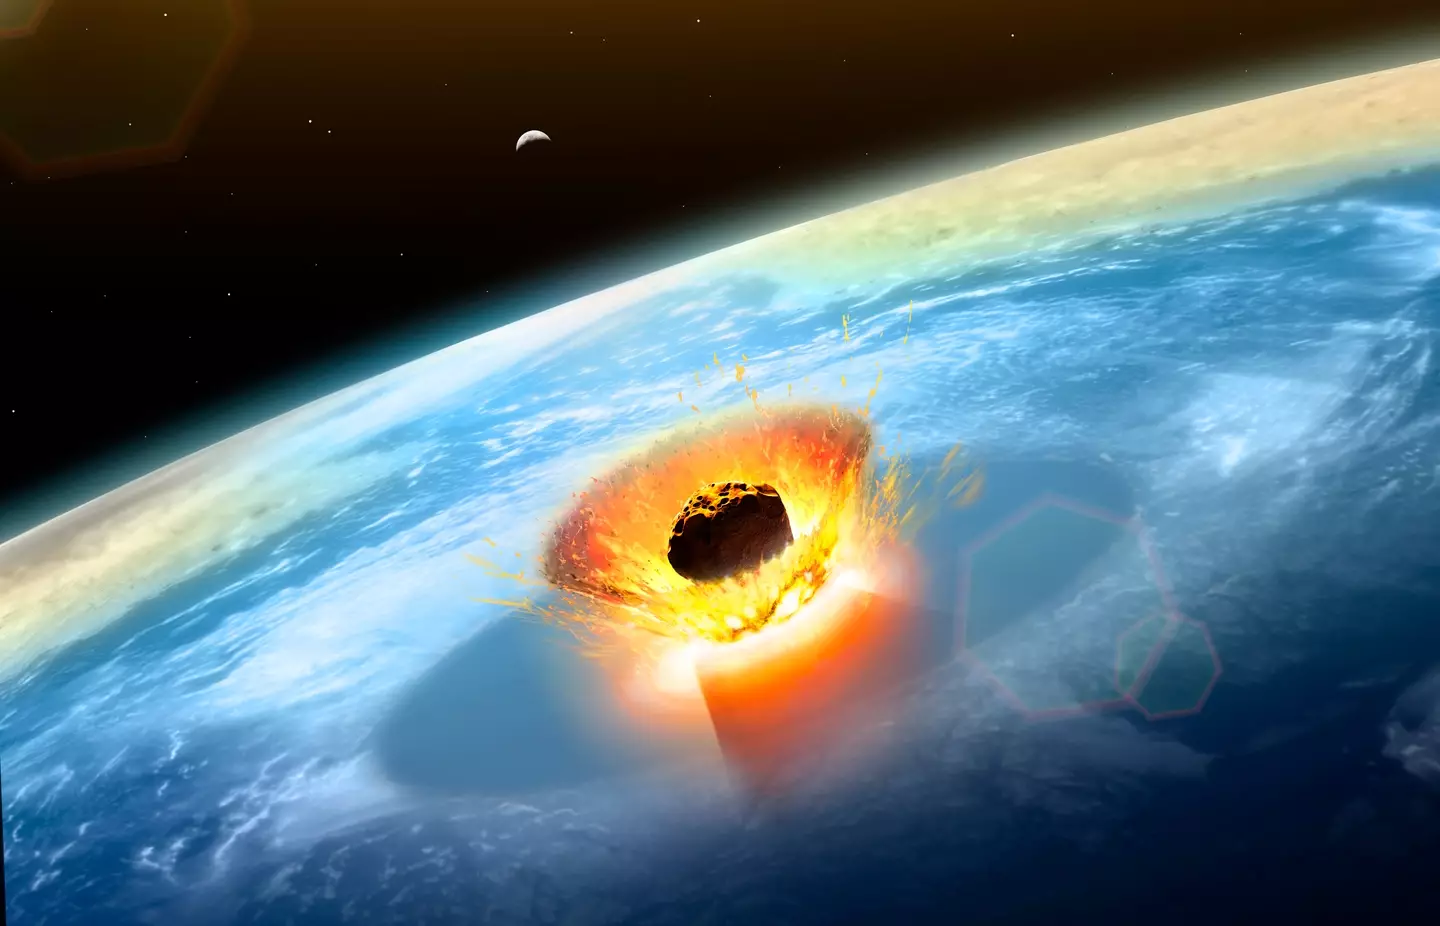 The Earth has seen major asteroid impacts in the past.